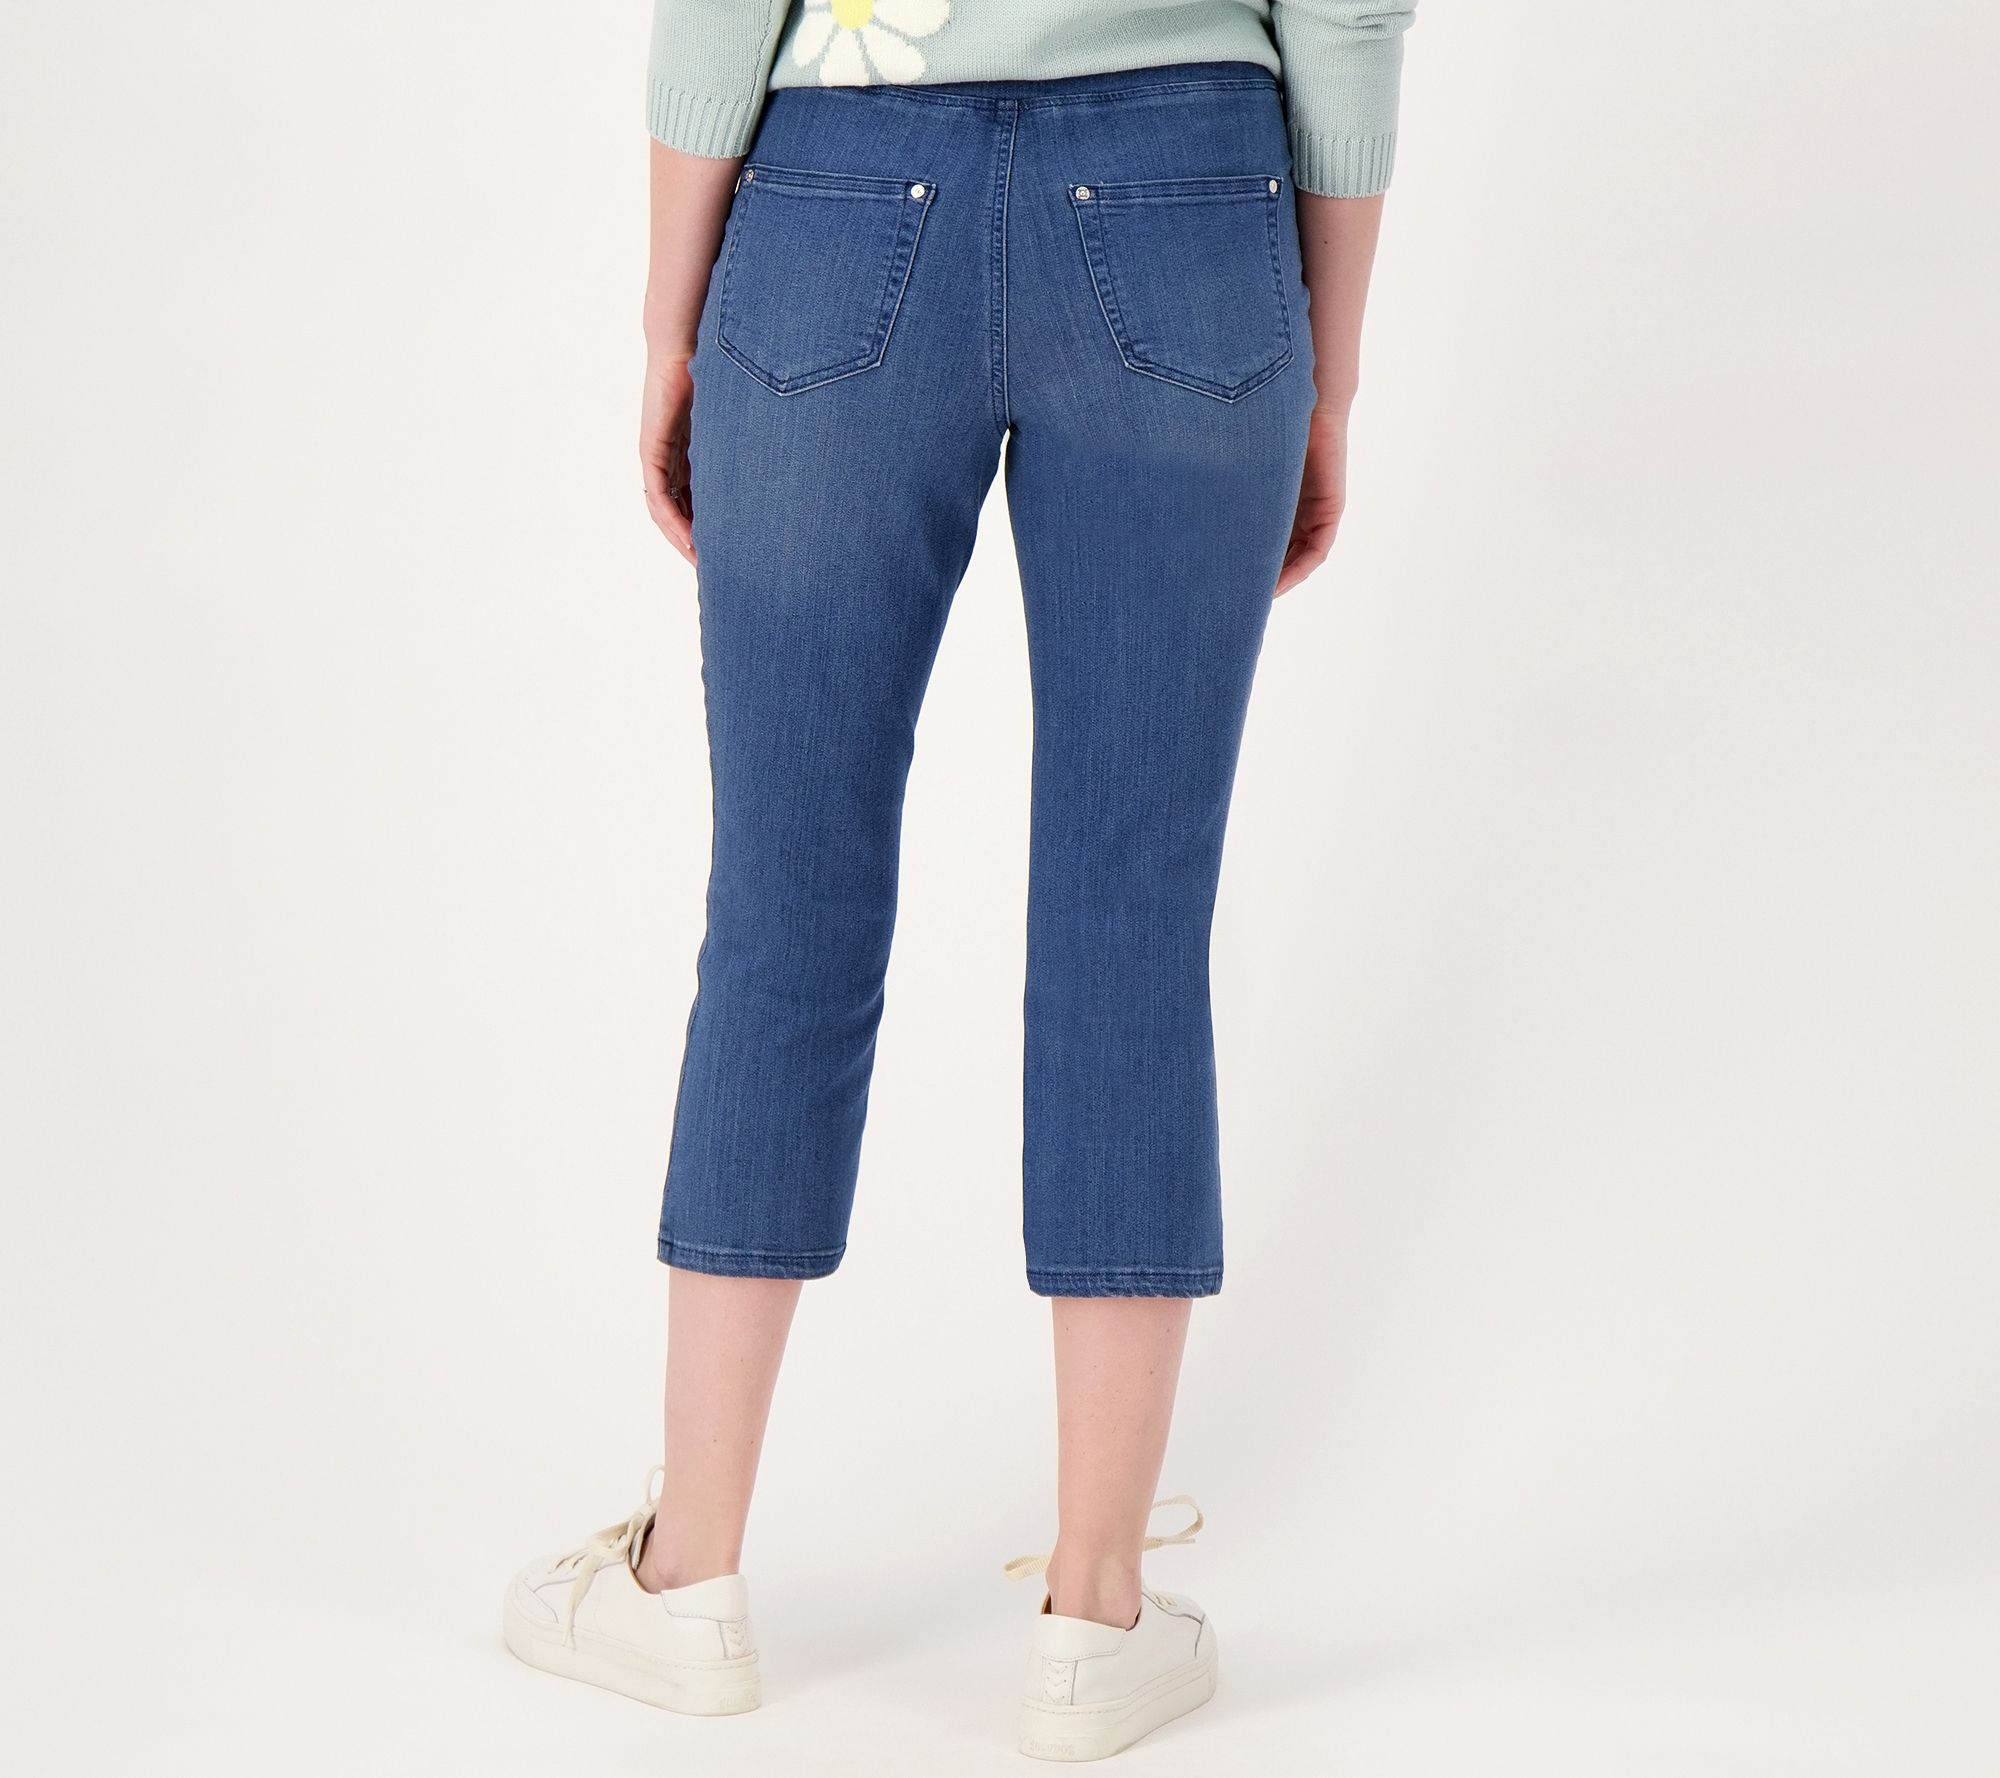 Women's High-Rise Slim Fit Ankle Pants - A New Day Blue 10 1 ct